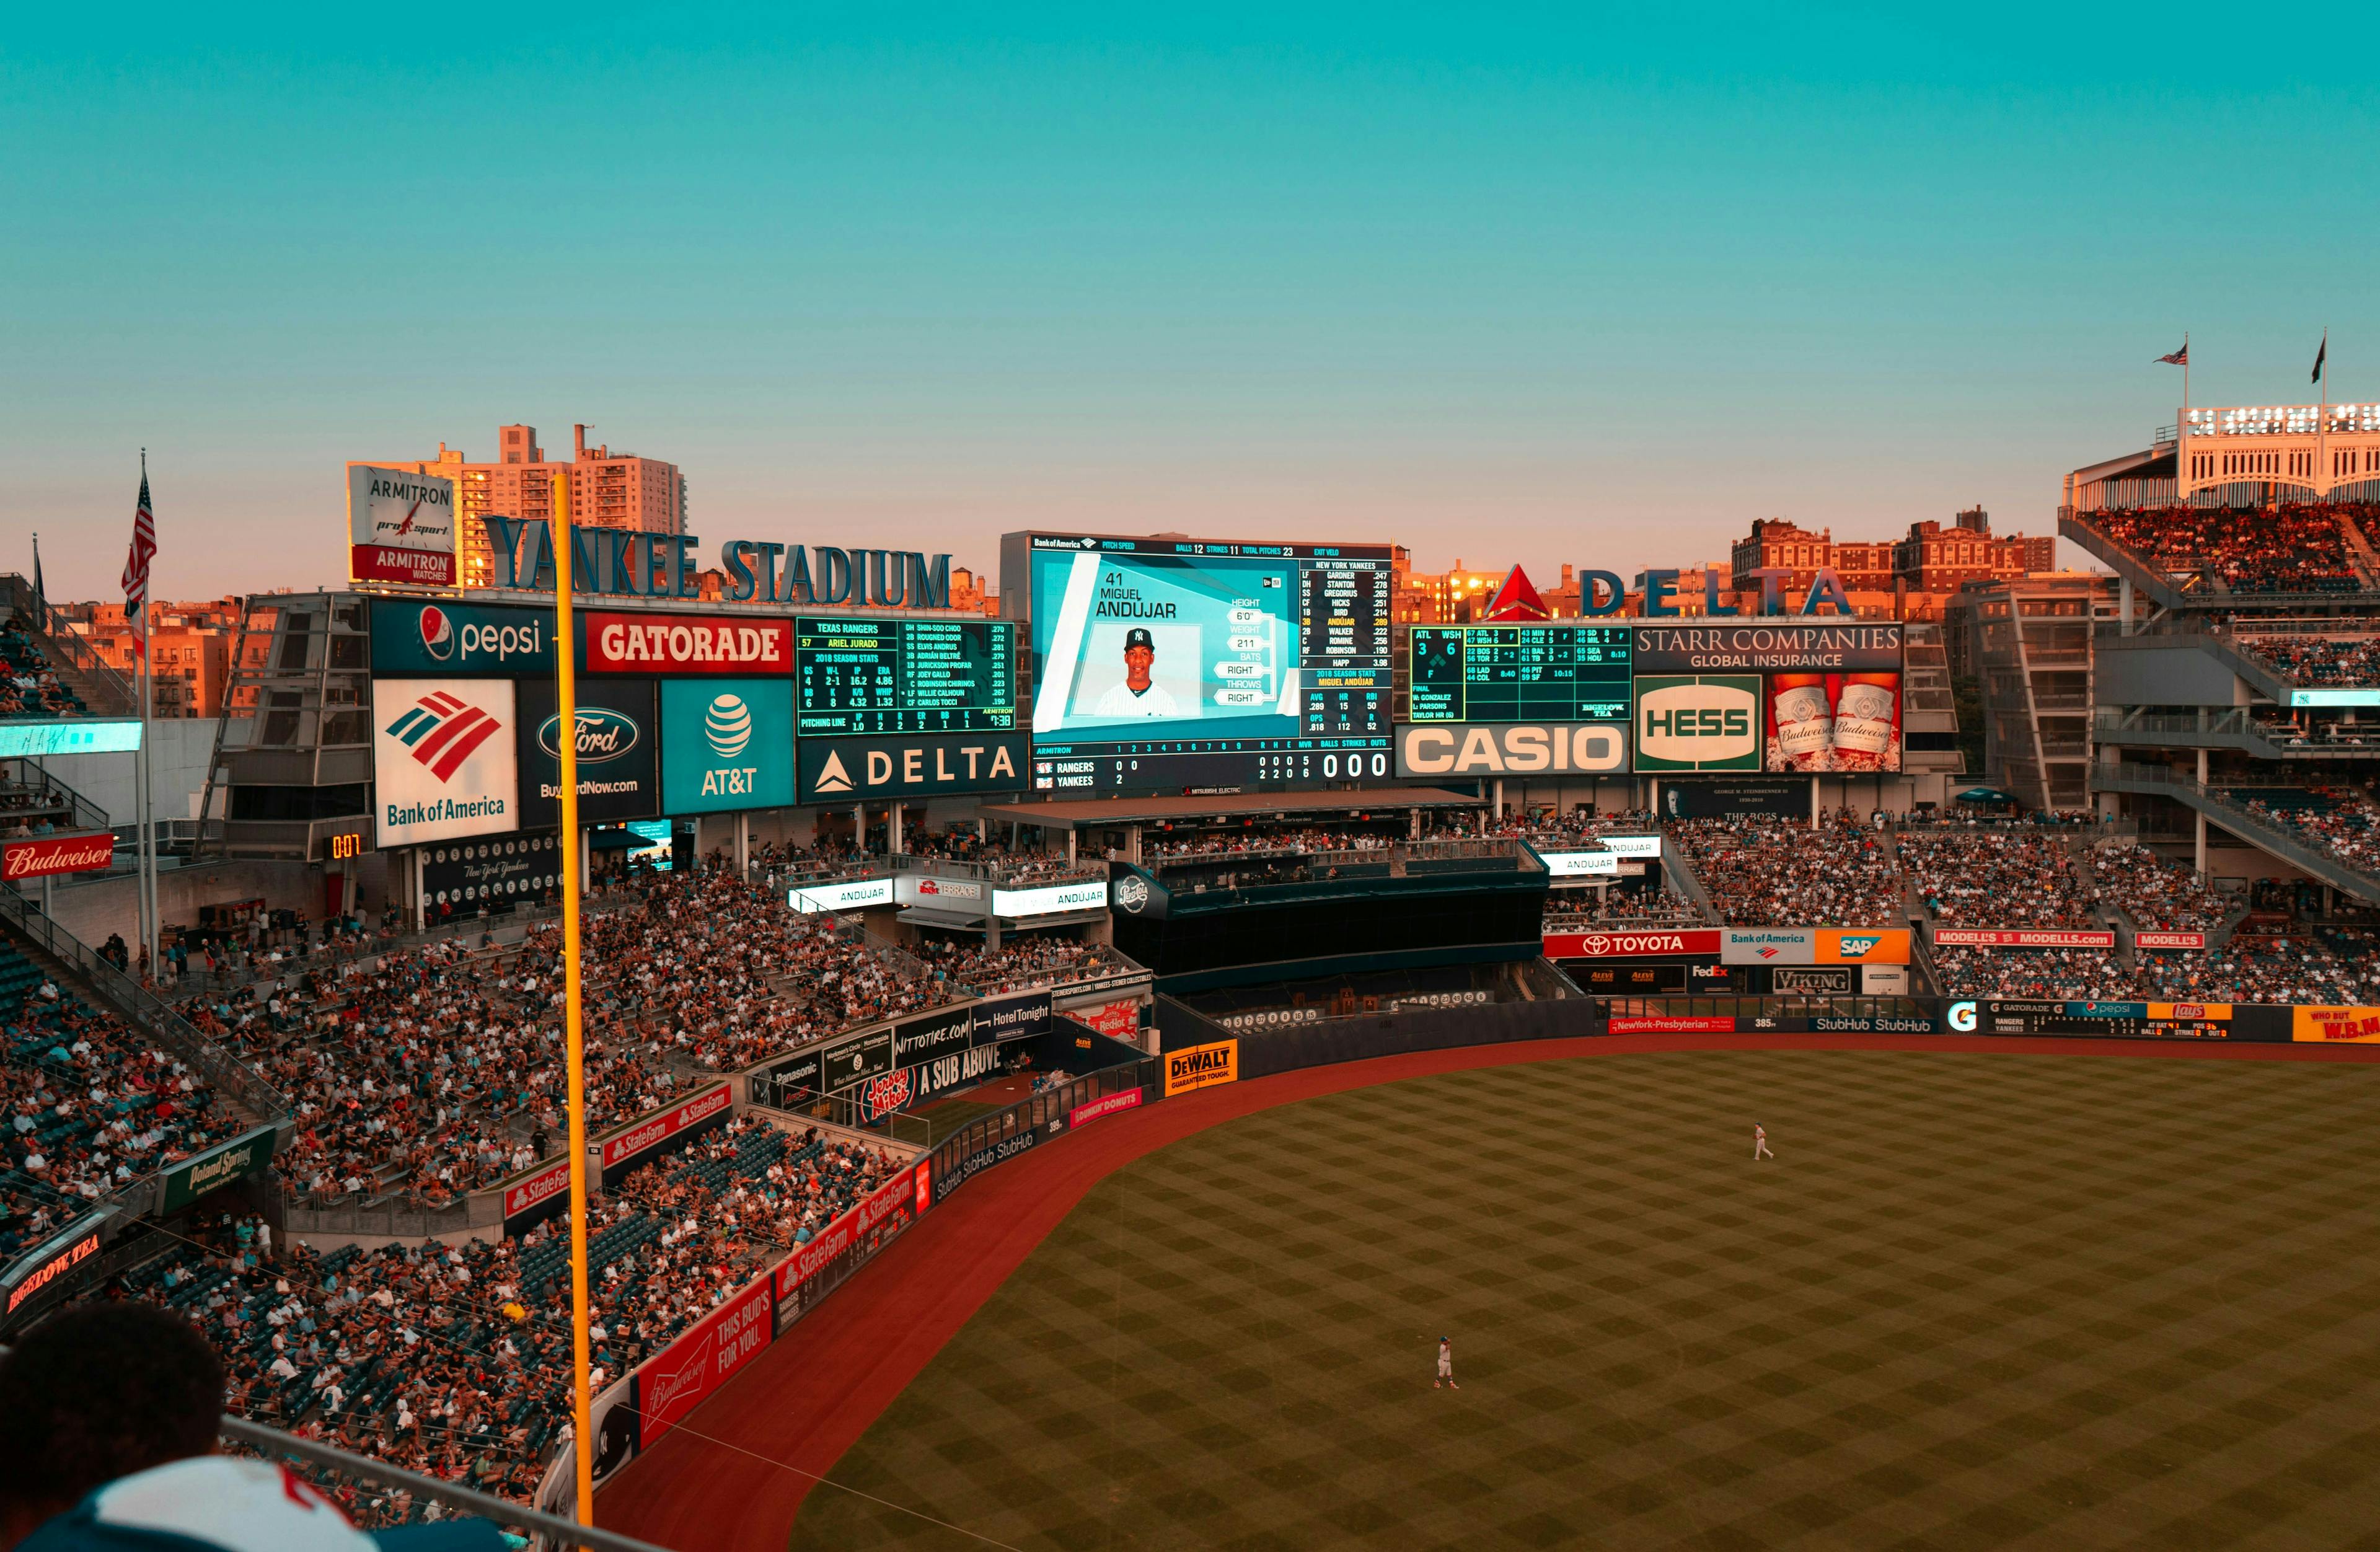 View of a baseball game at Yankee Stadium during a warm sunset, showing the field, crowded stands, and the large digital scoreboard displaying player information and advertisements.